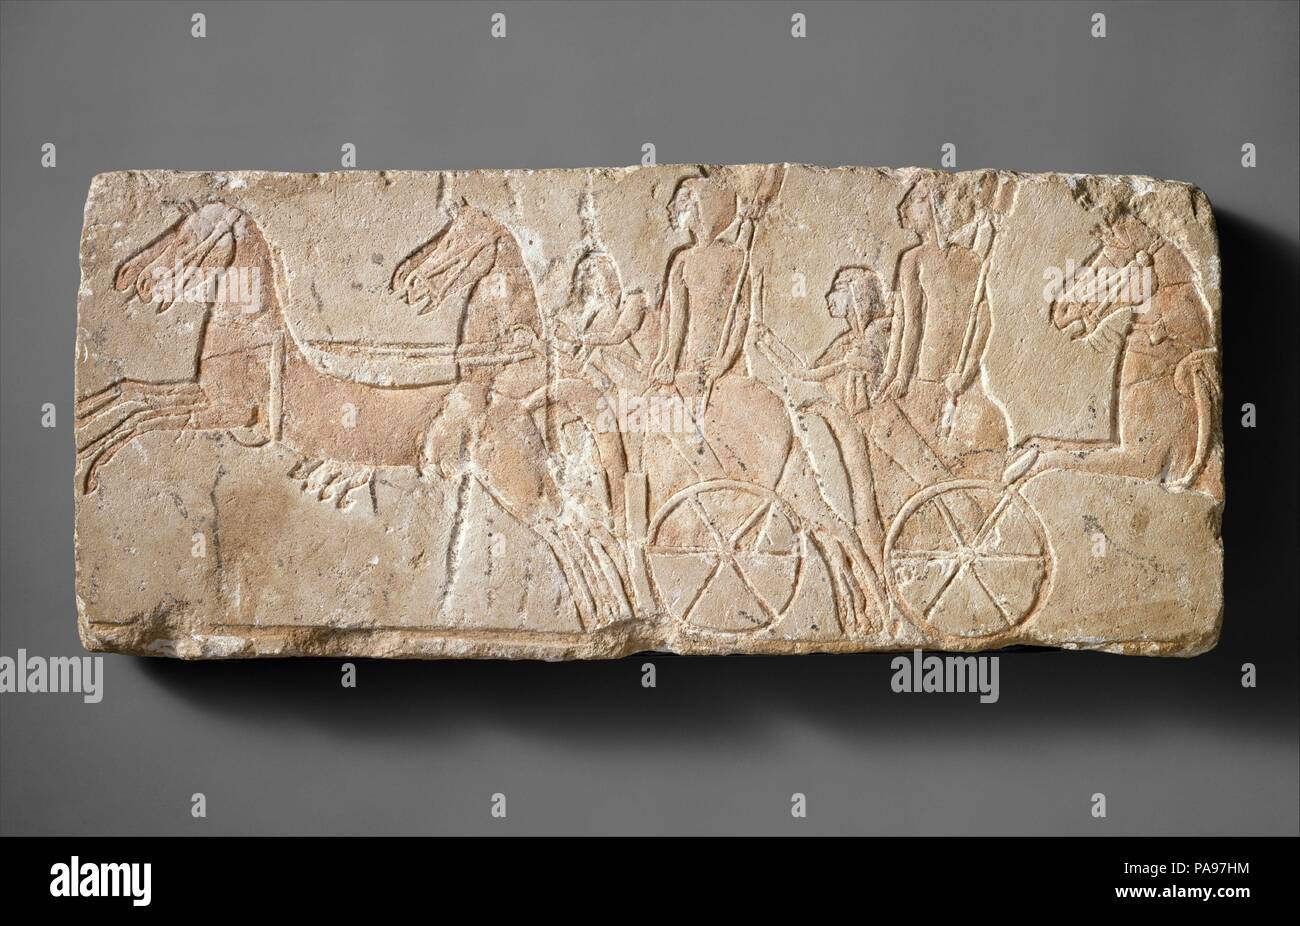 Chariots with Court Ladies. Dimensions: H. 23.5 cm (9 1/4); w. 54.7 cm (21 9/16 in). Dynasty: Dynasty 18. Reign: reign of Akhenaten. Date: ca. 1353-1336 B.C..  Court ladies taking part in a royal procession stand in light chariots, as their drivers urge on the horses. Museum: Metropolitan Museum of Art, New York, USA. Stock Photo